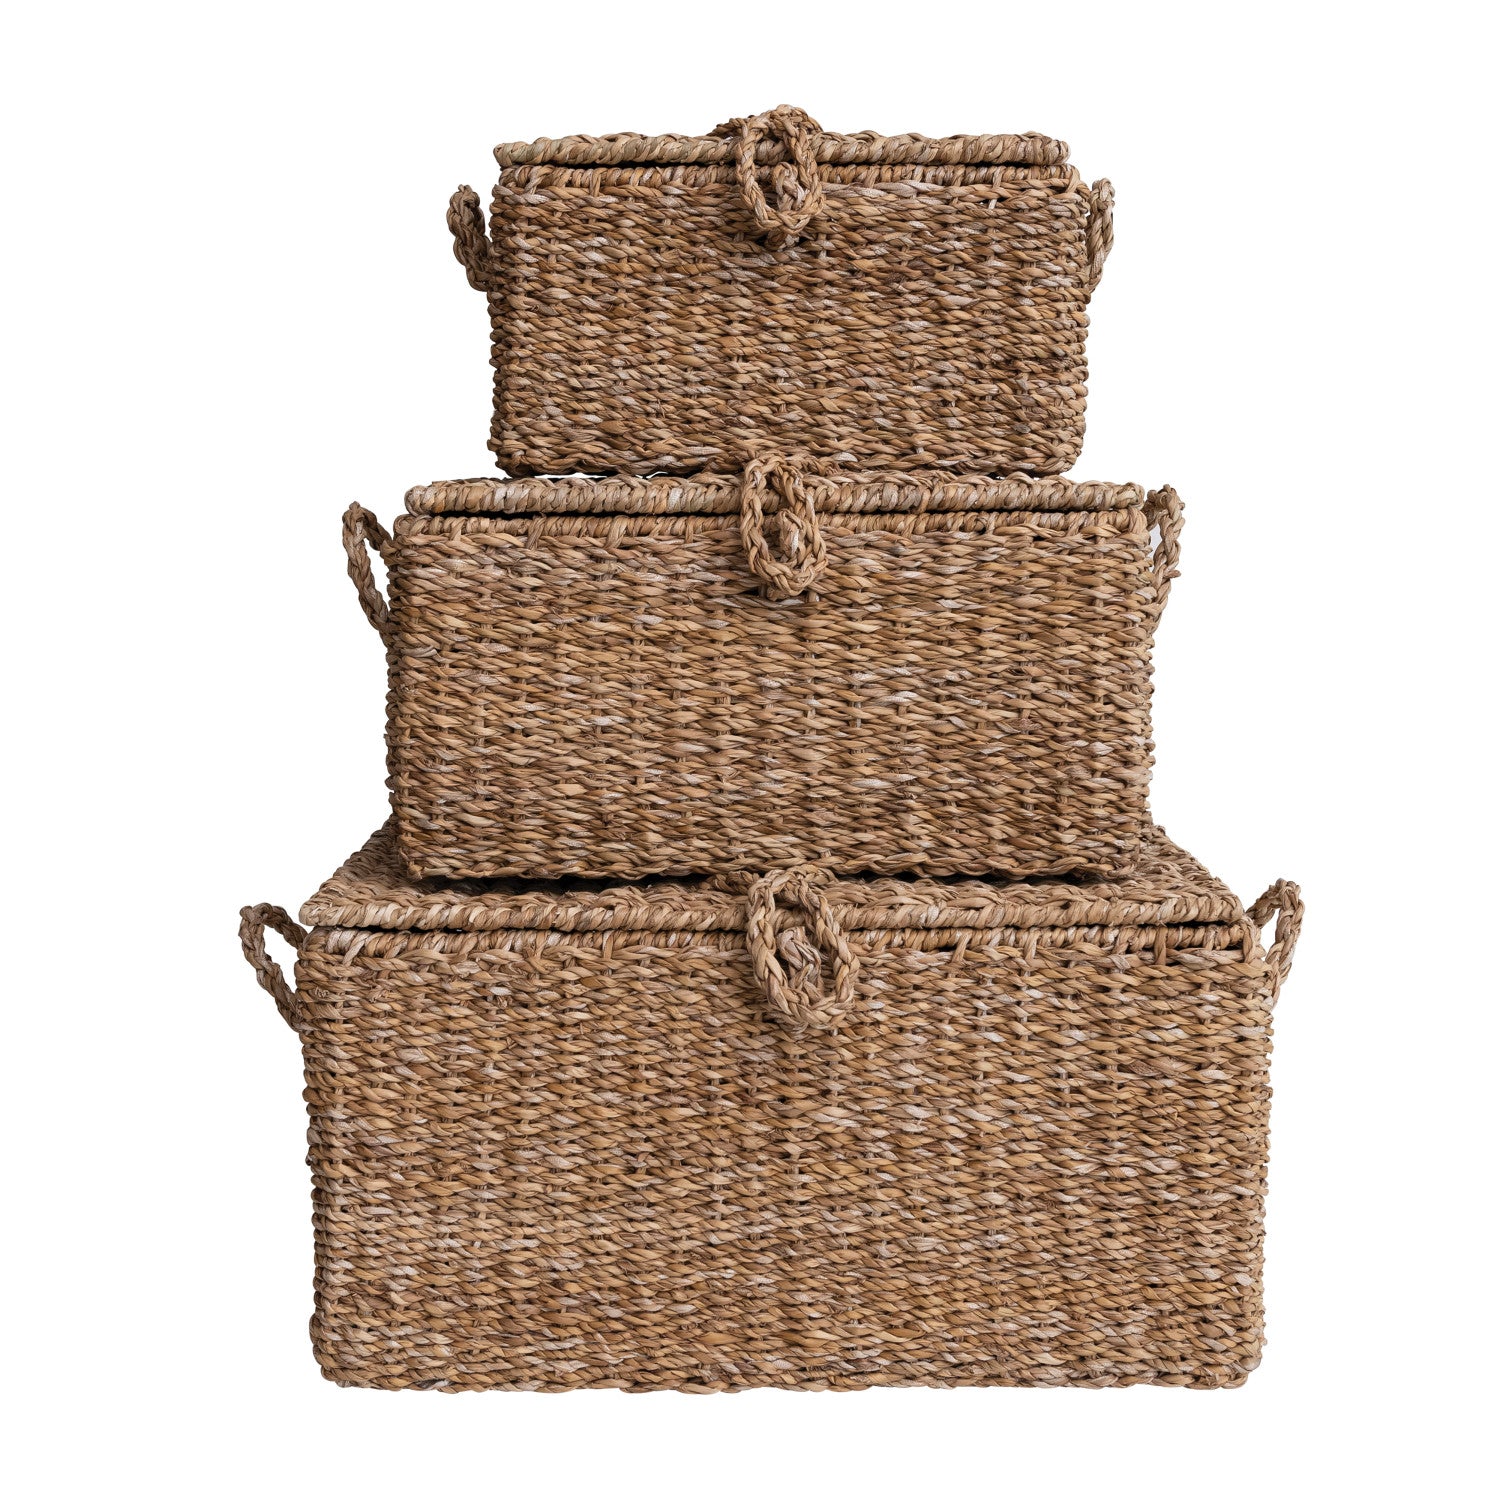 Hand-Woven Seagrass & Wire Framed Trunks, Natural, Set of 3